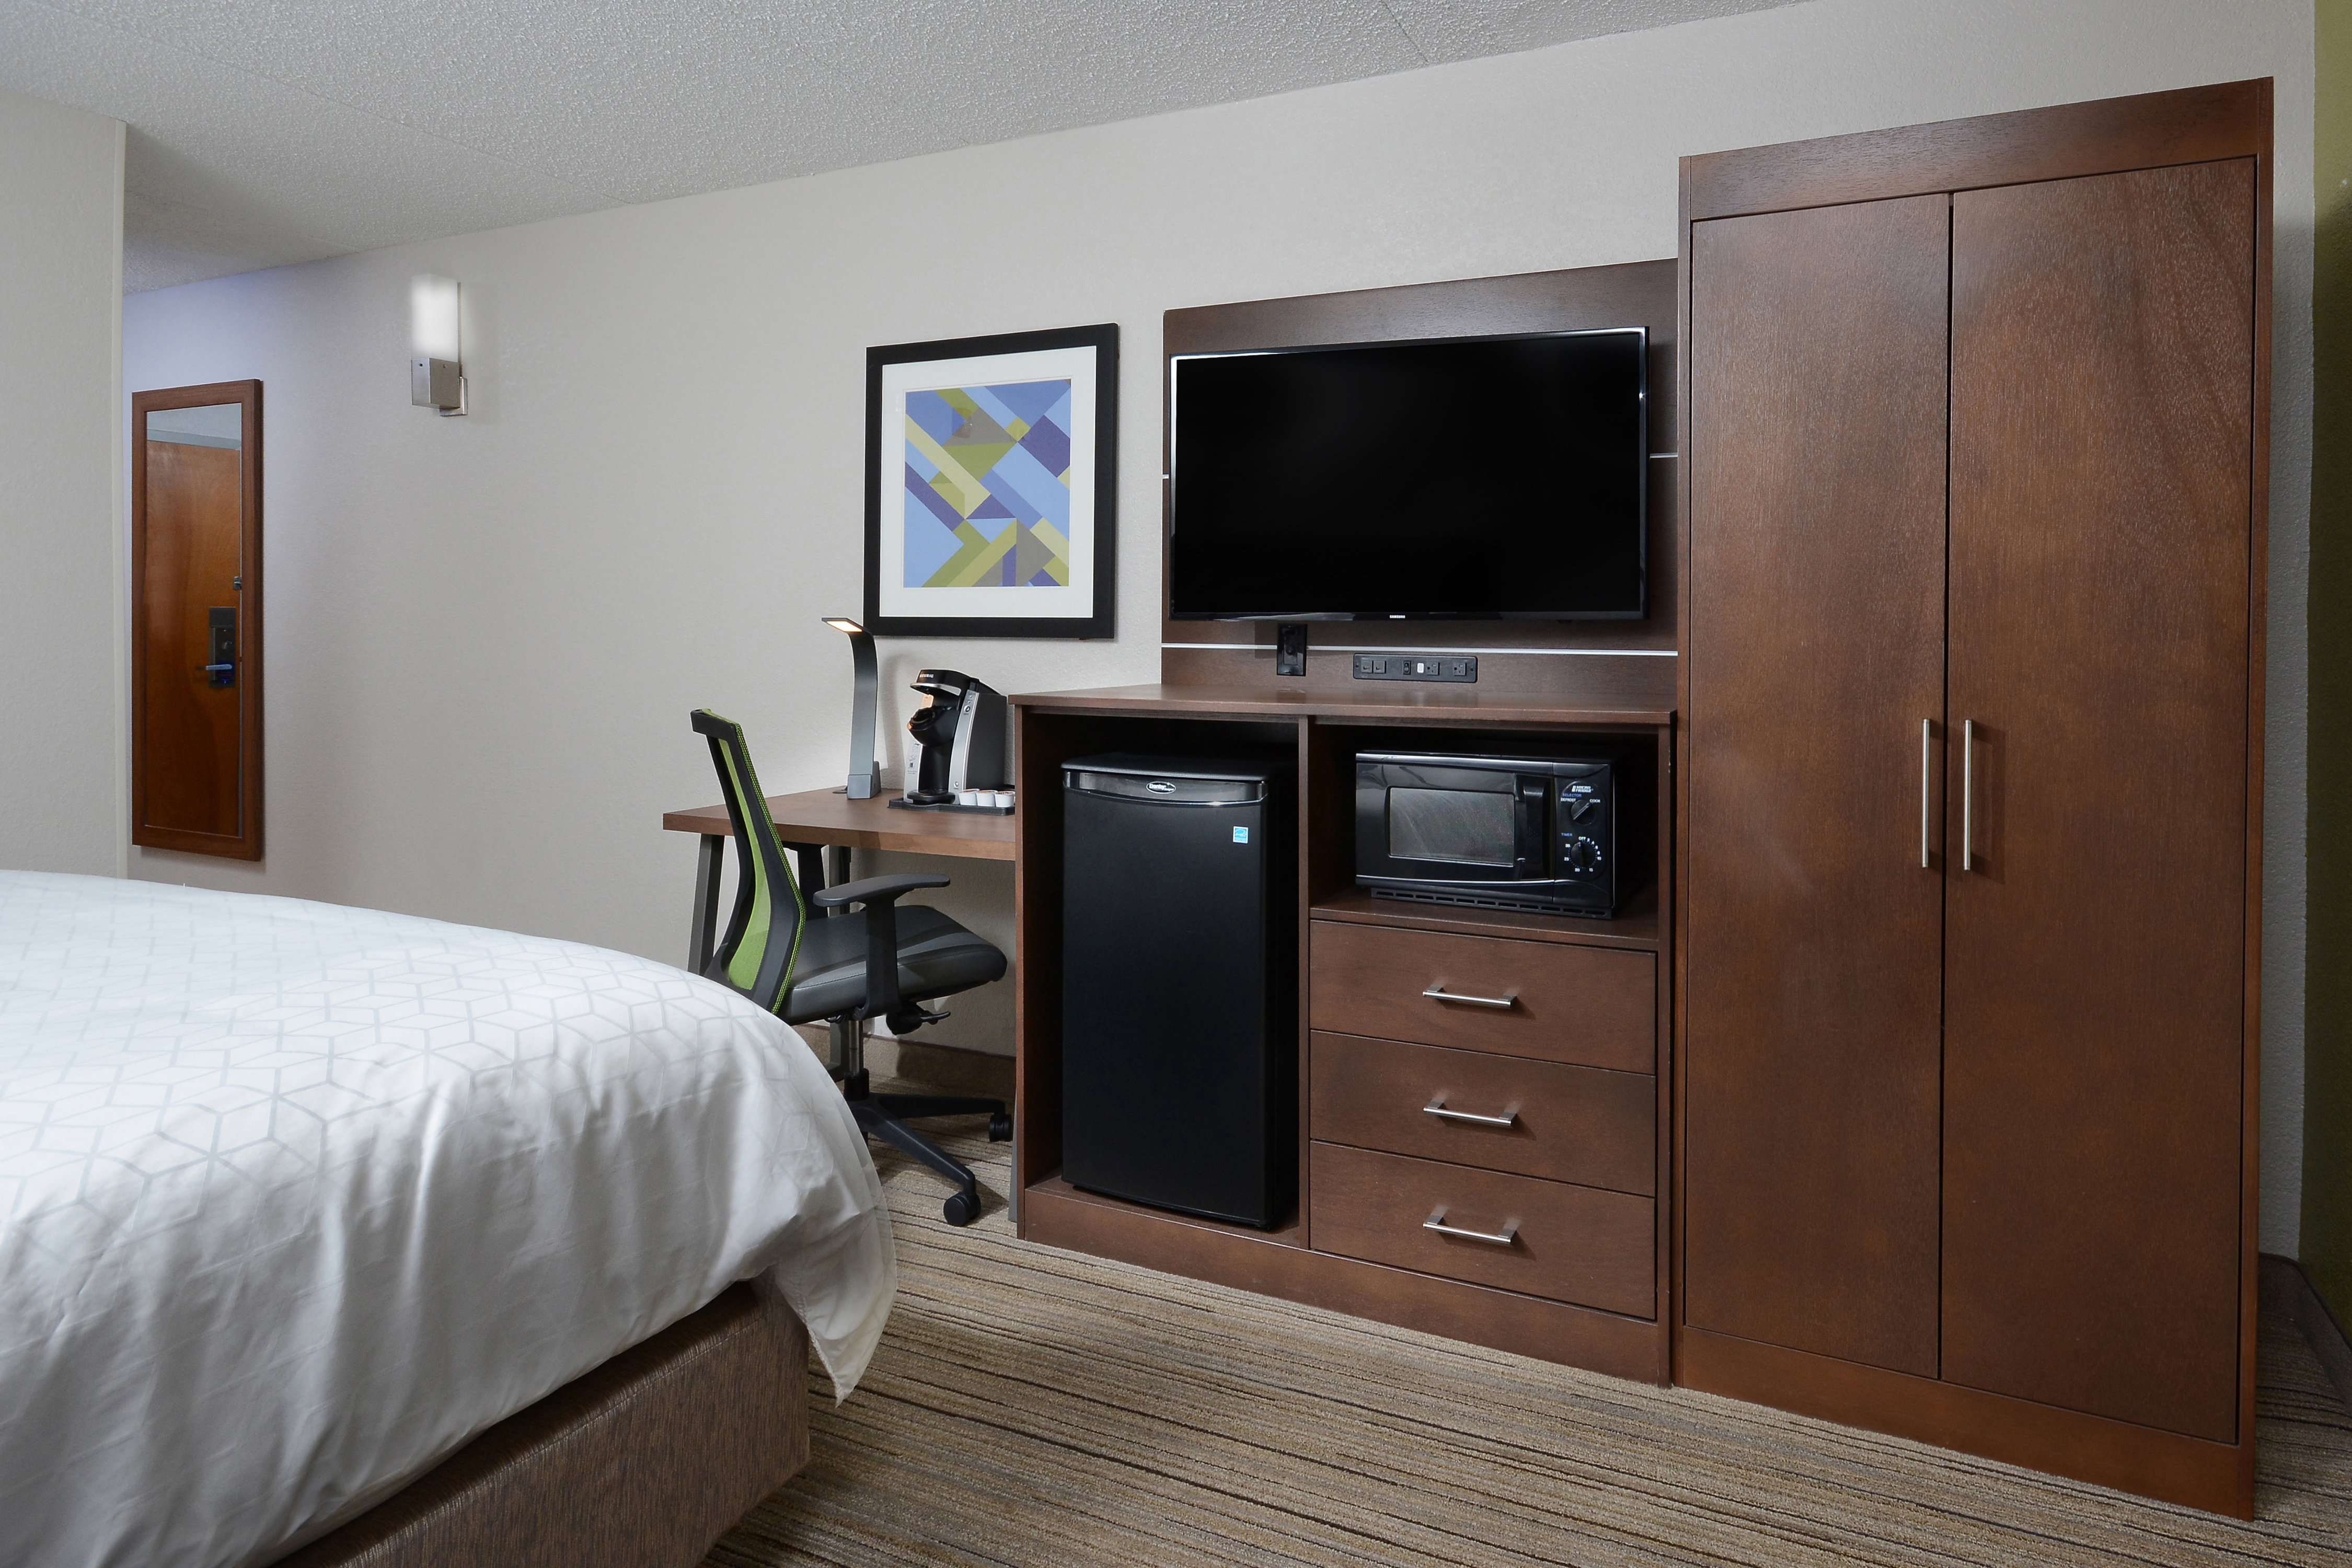 Our ADA King rooms are designed to put everything within reach.